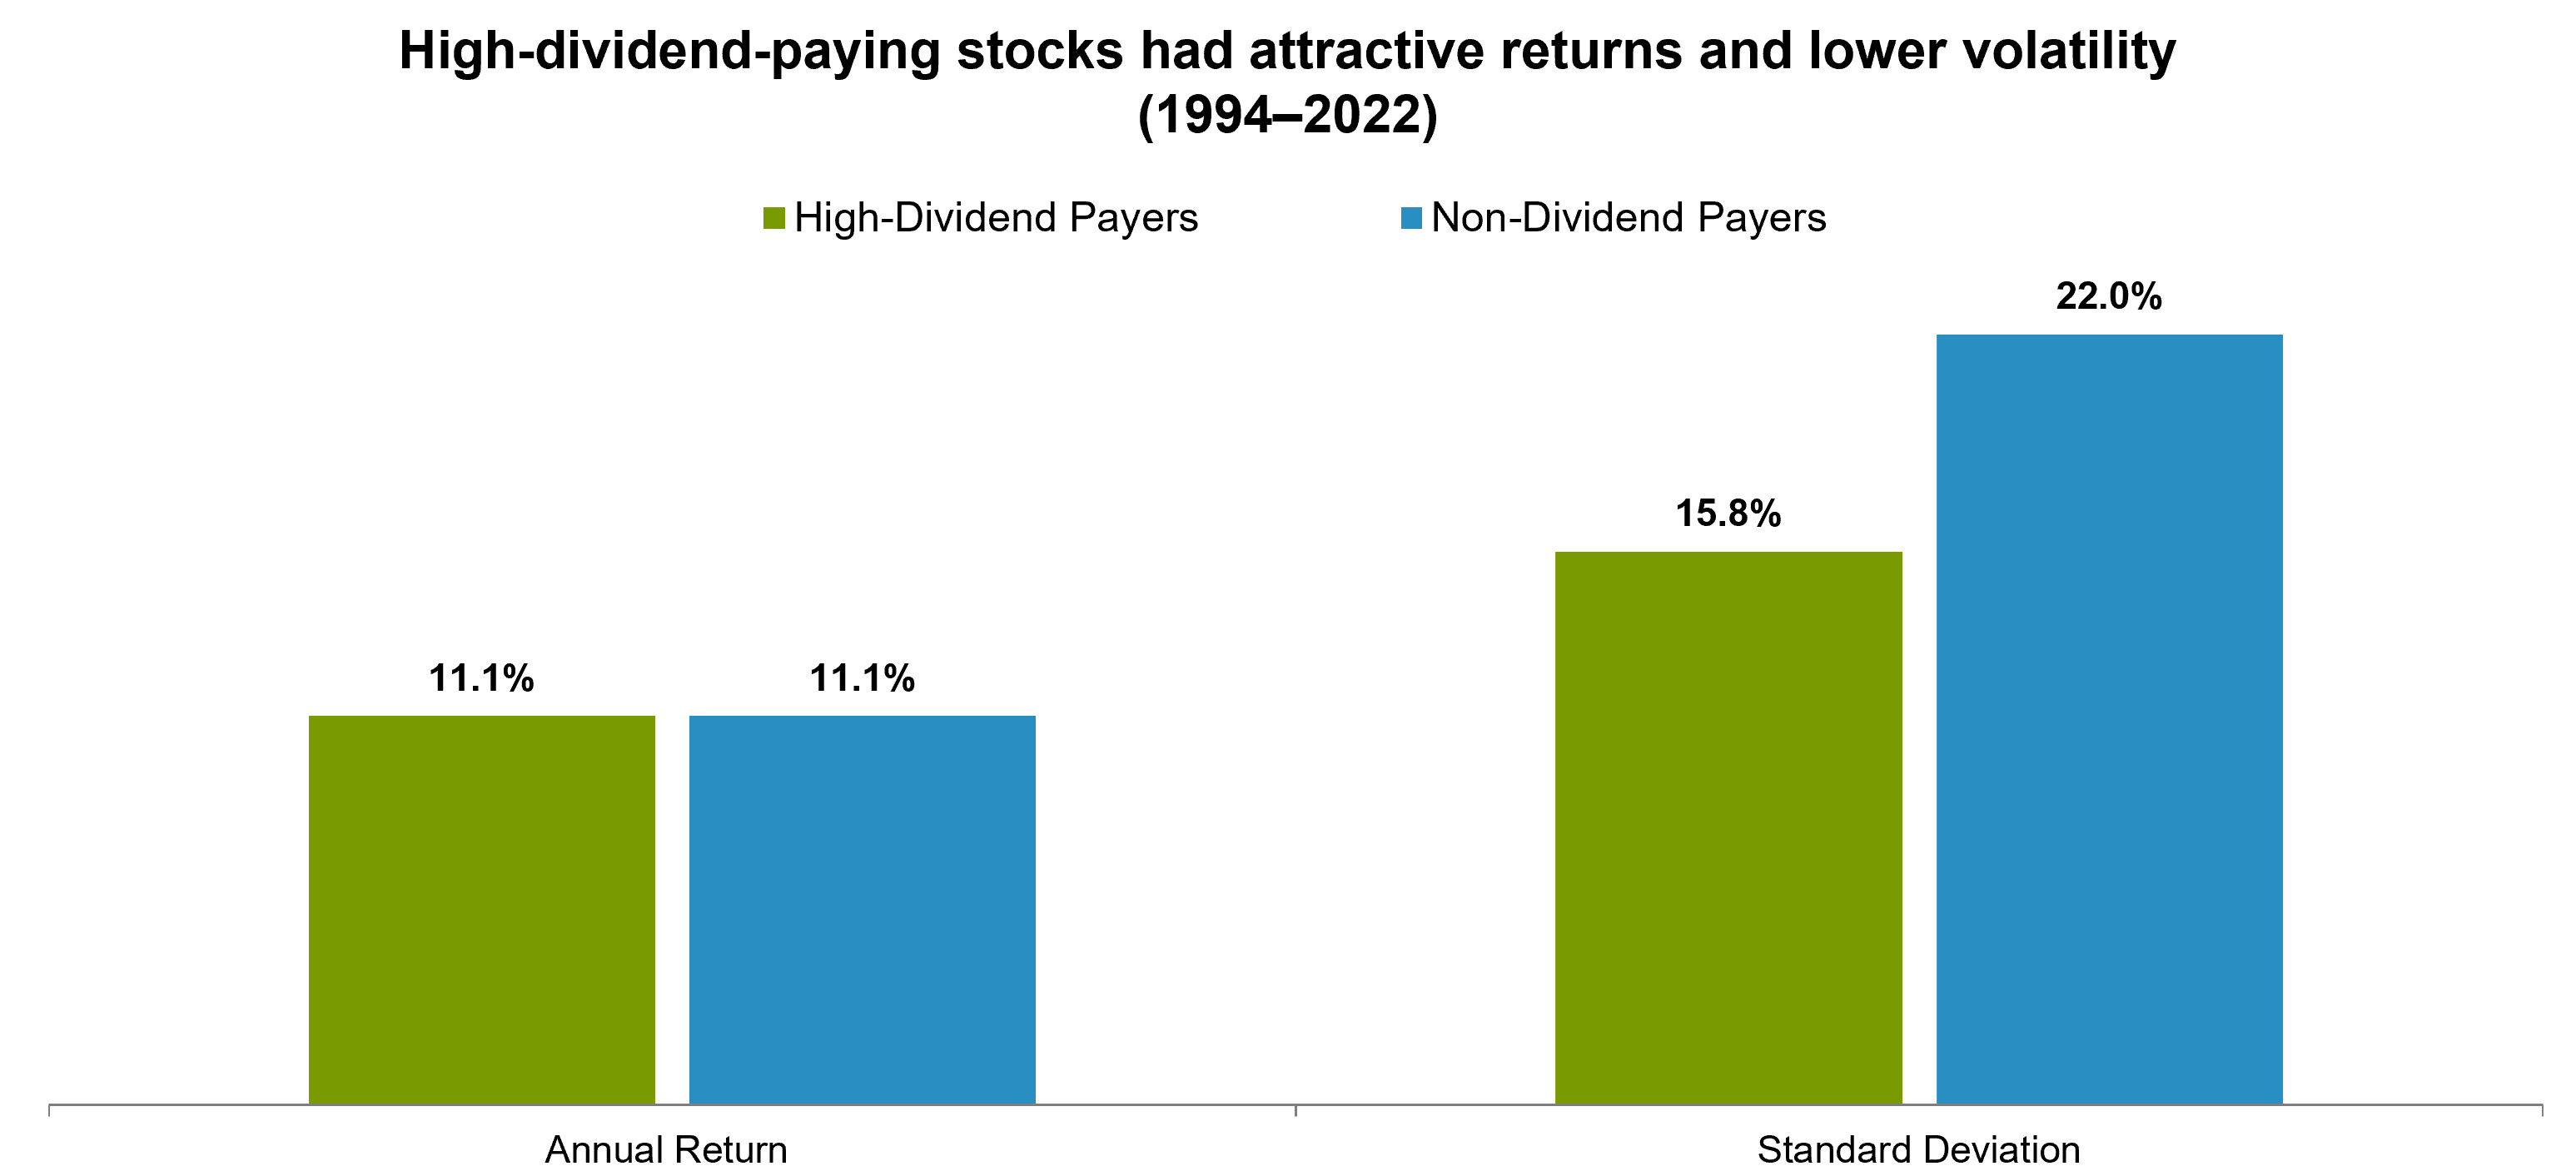 From 1994 to 2021, high dividend stocks had an annual return of 12.4%, compared to 12.7% for non dividend paying stocks. In the same period, the standard deviation of high dividend paying stocks was 16.8% compared to  24.9% for non dividend paying stocks.